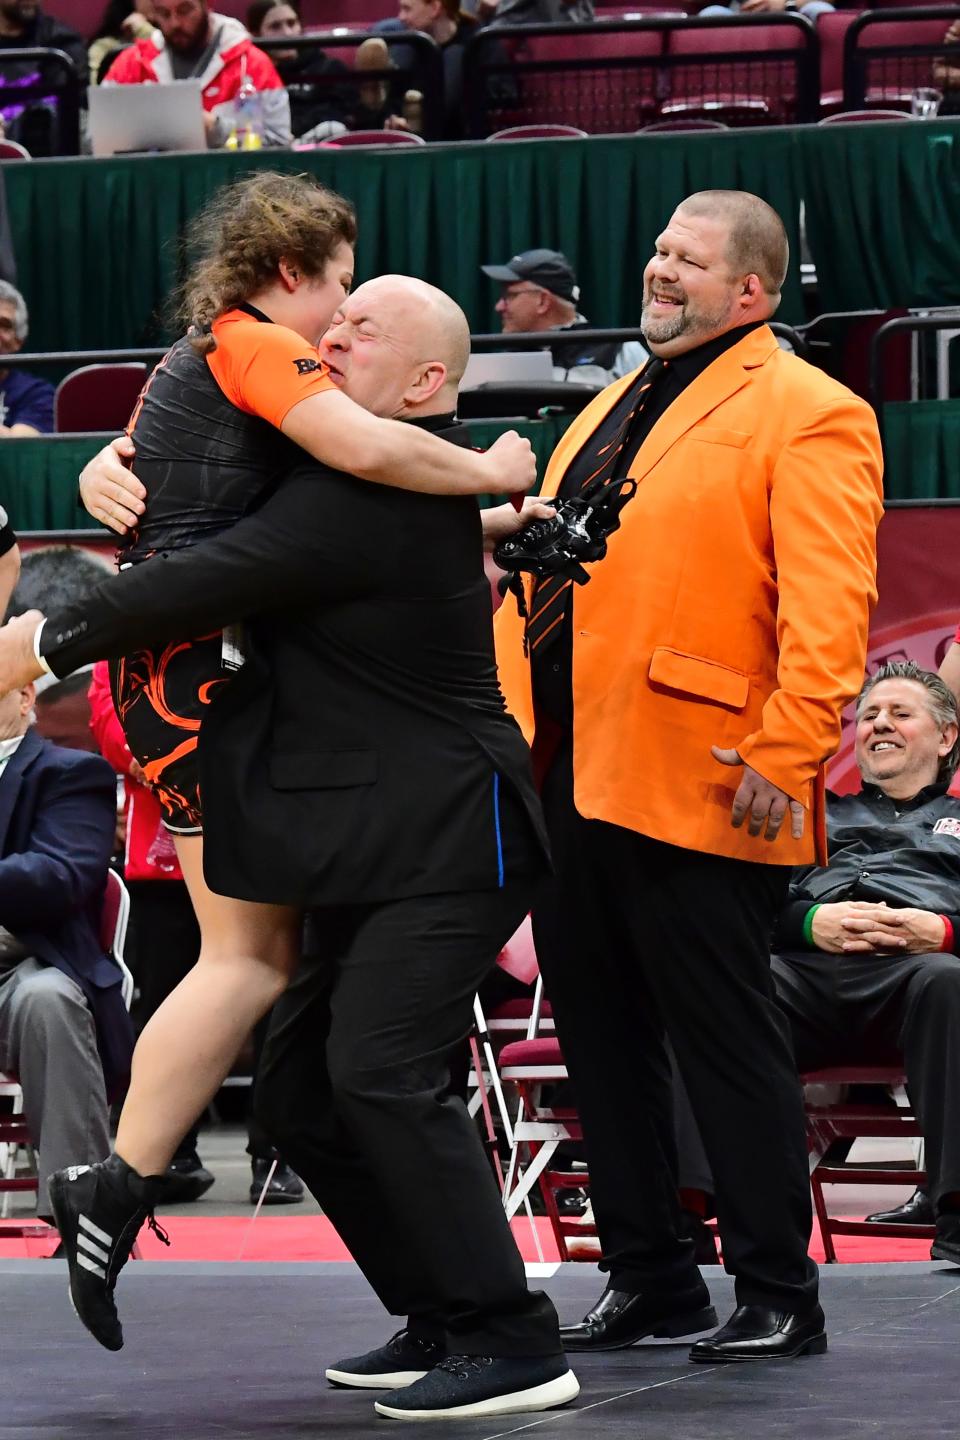 Elizabeth Madison receives an embrace of joy from the Loveland coaches after winning the 170-pound championship at the OHSAA inaugural girls wrestling state tournament, March 10-12, 2023.